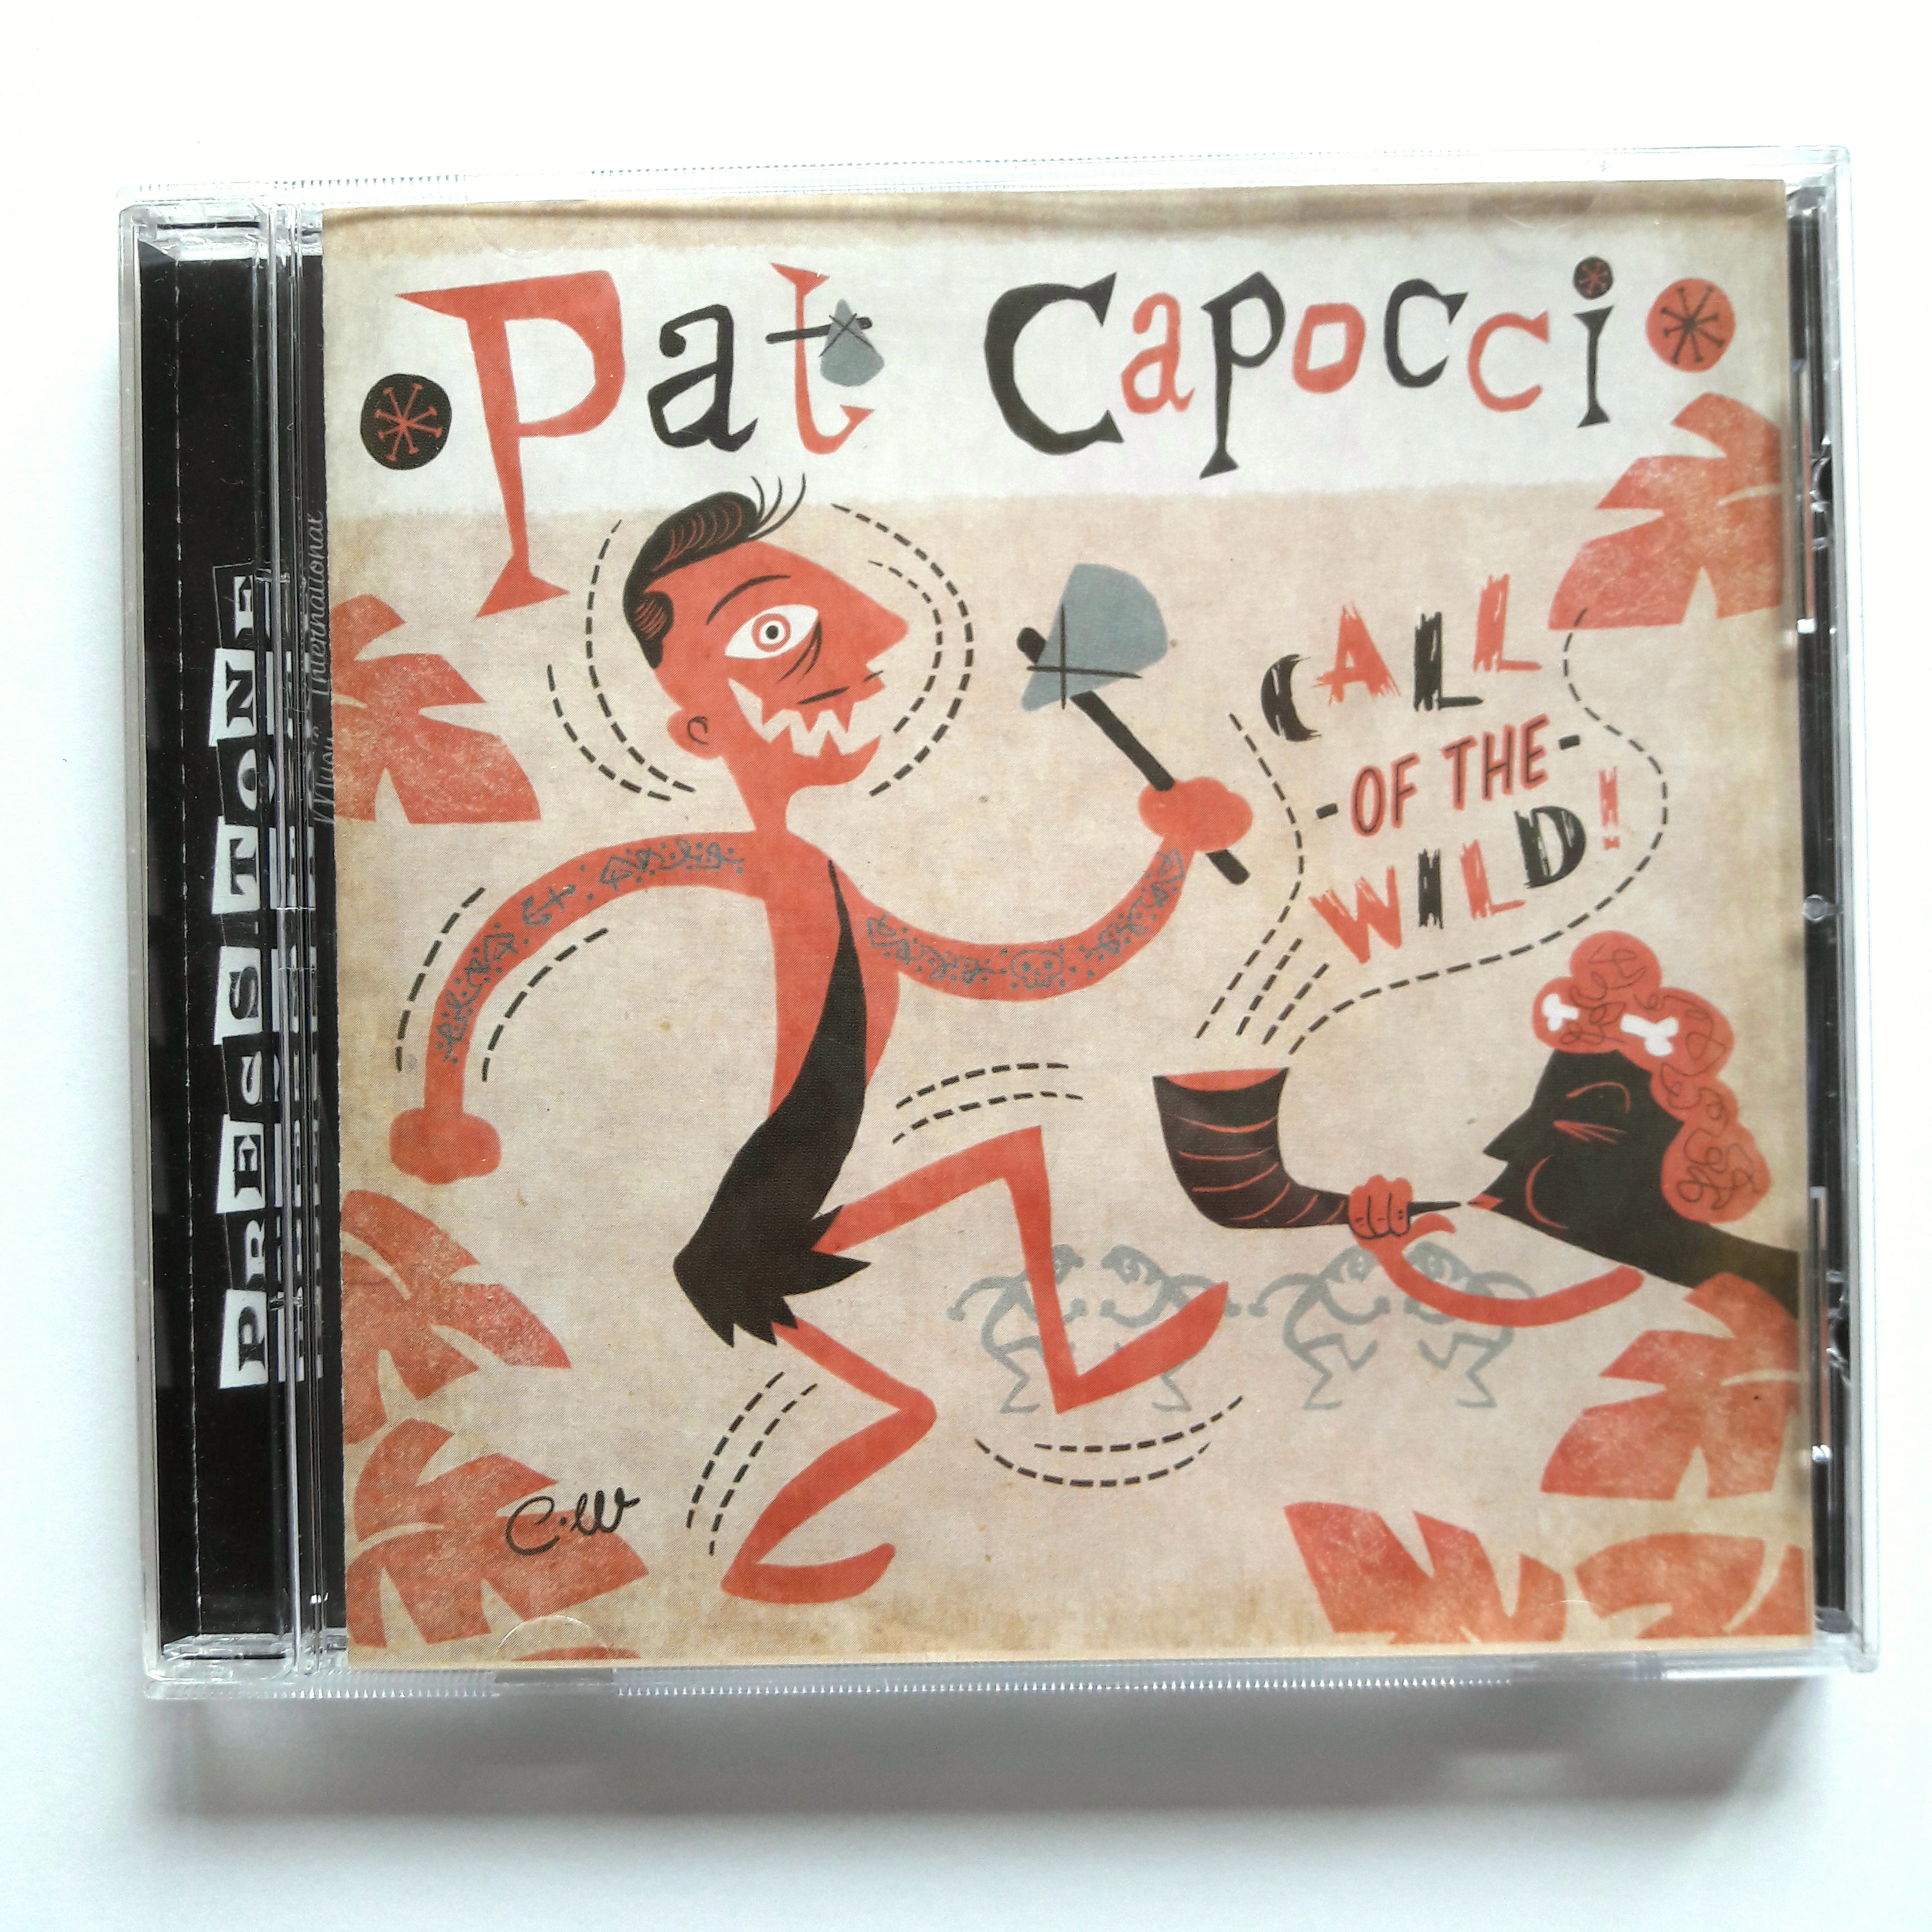 Pat Capocci - Call of the Wild!